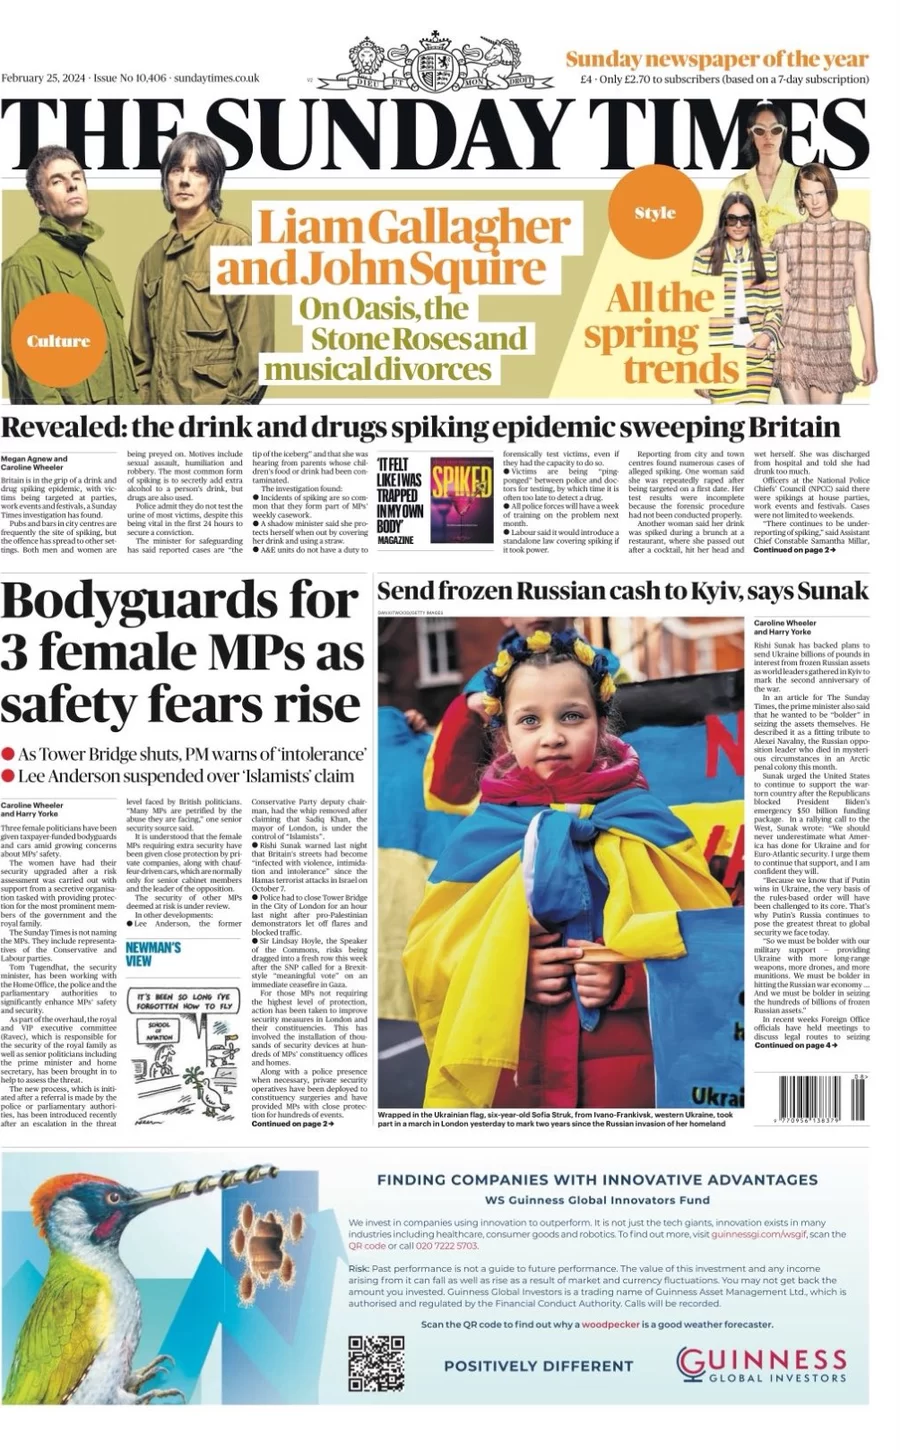 The Sunday Times - Bodyguards for 3 female MPs as safety fears rise